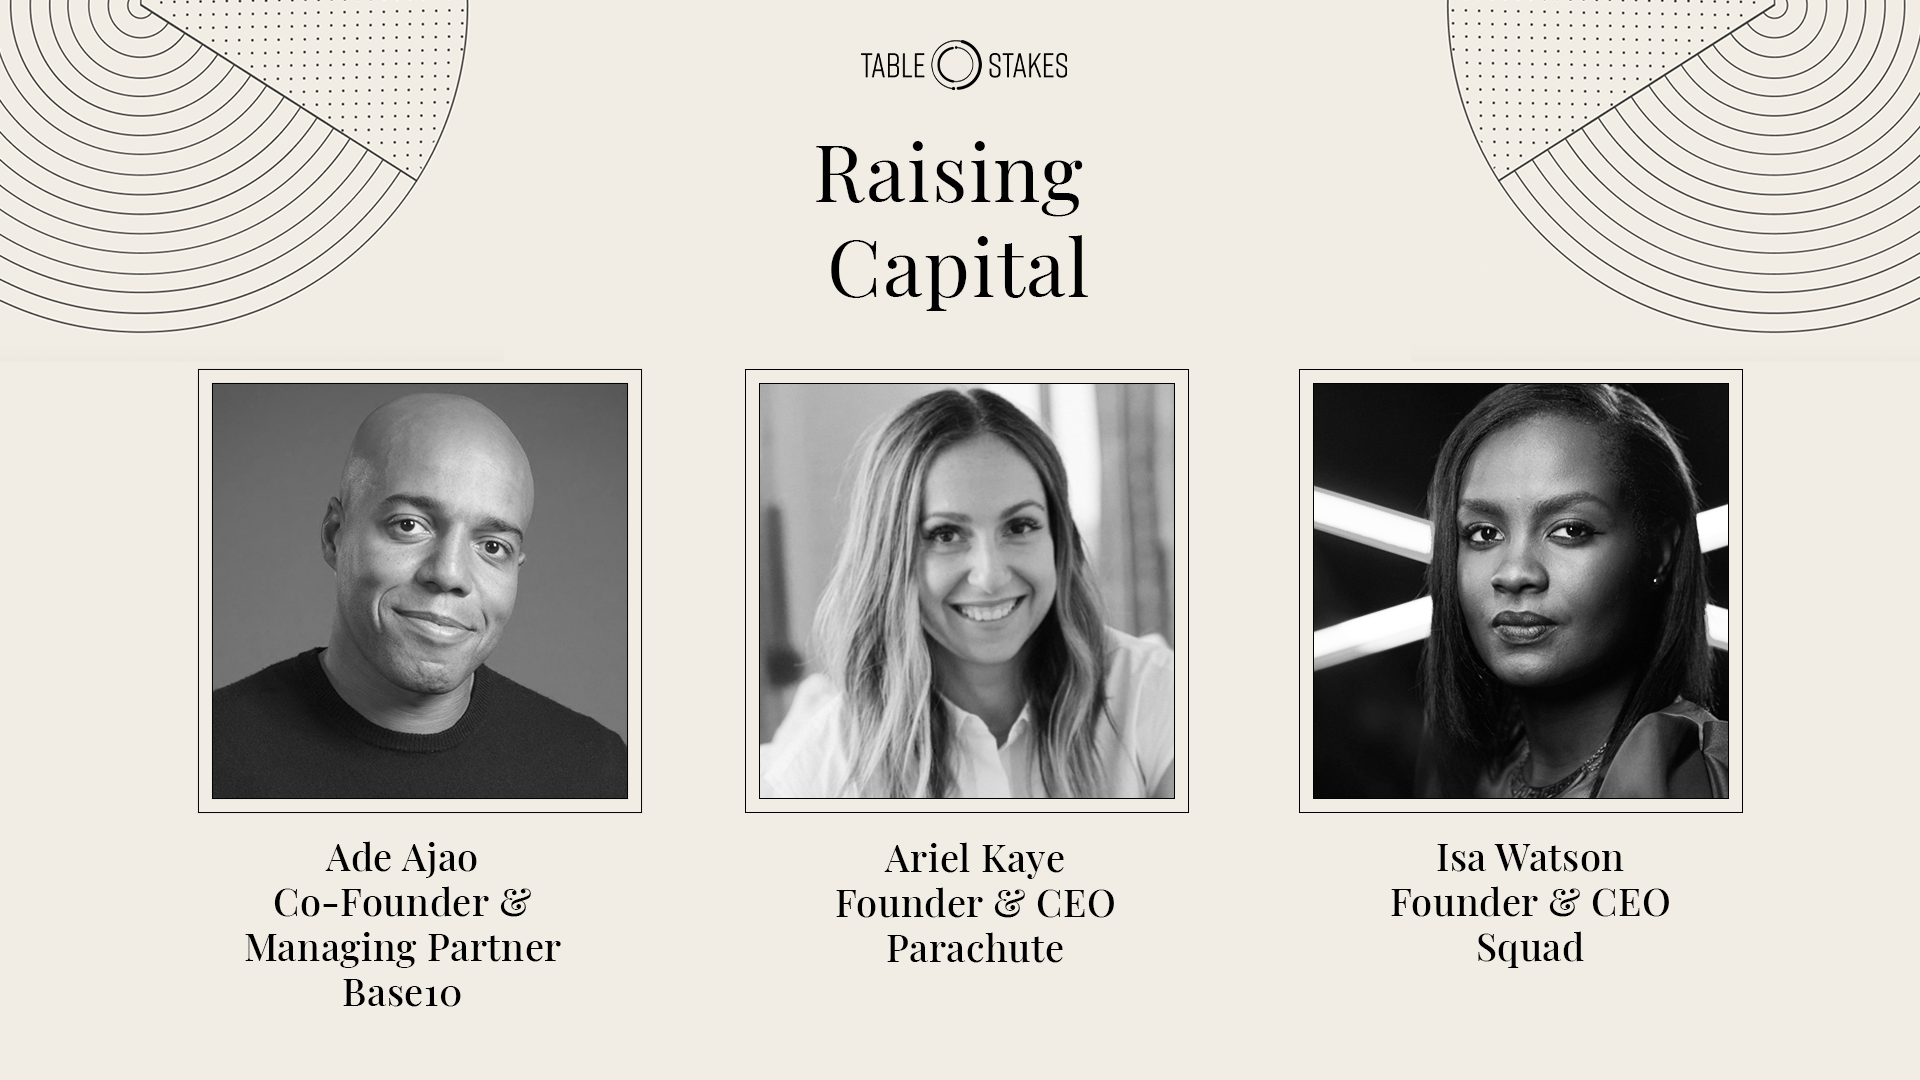 Raising capital: A conversation from Table Stakes 2020